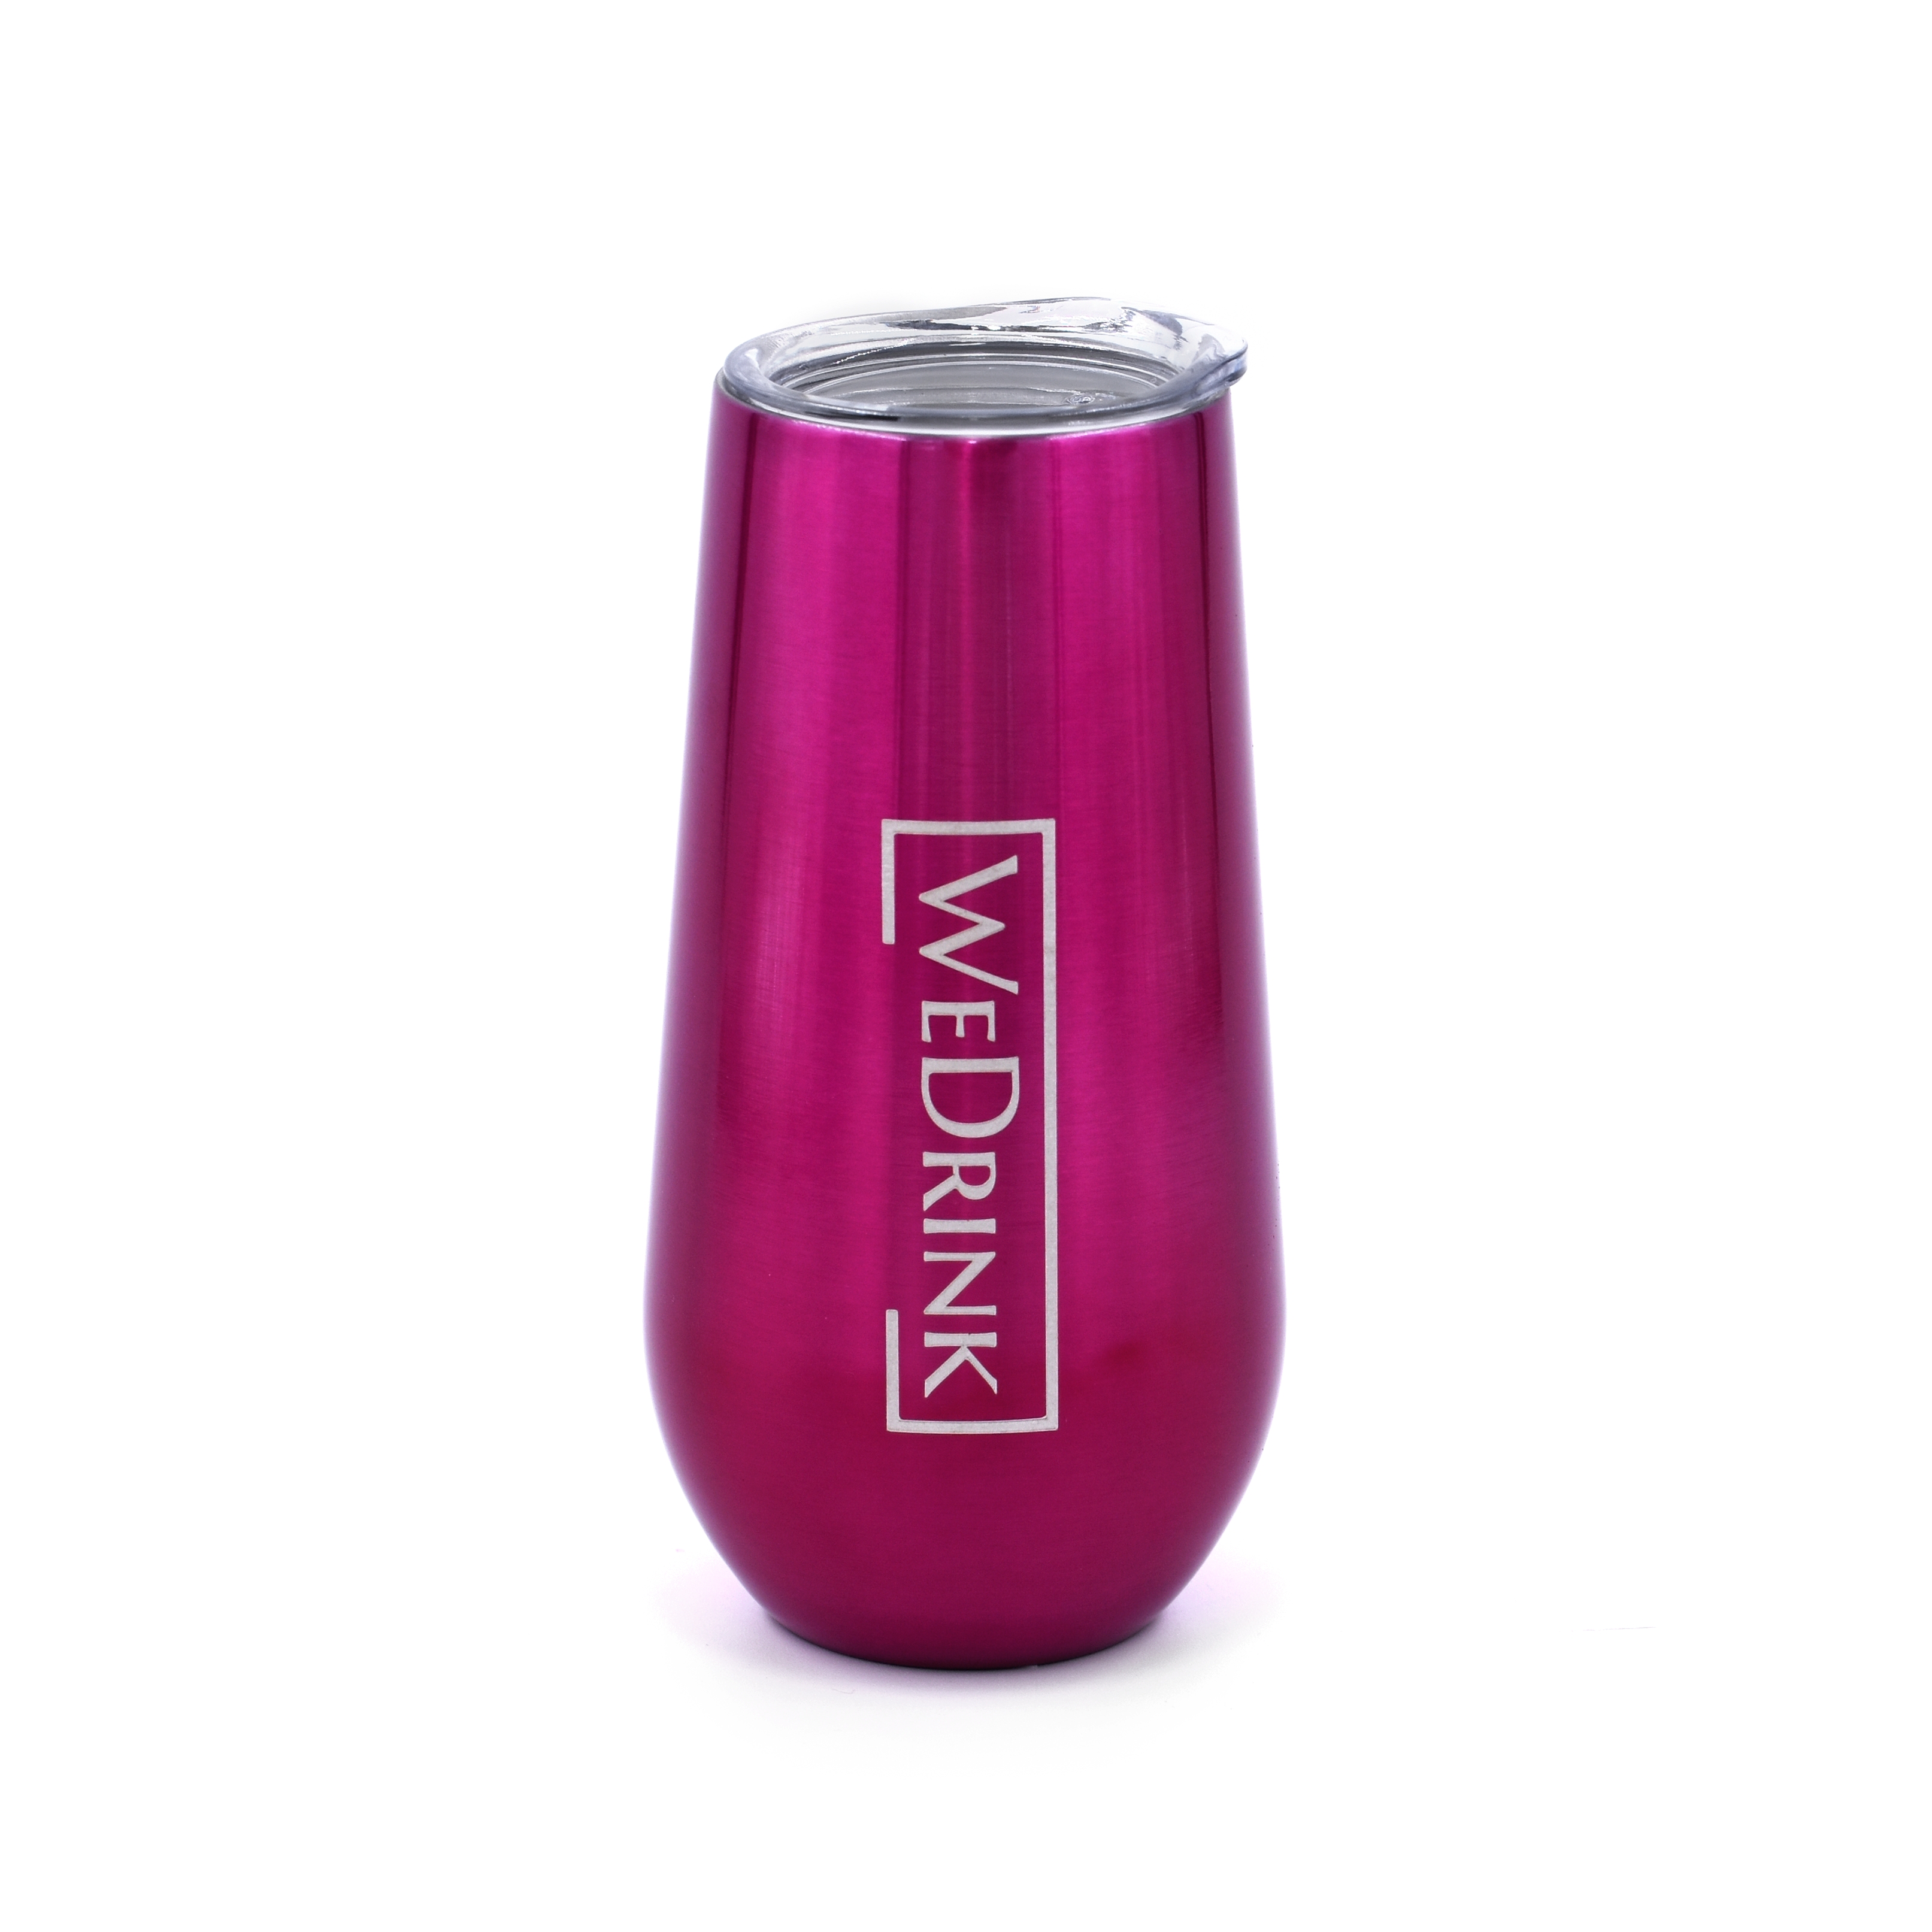 WEDRINK Mimosa cup 150 ml Charming Pink (WD-MC-07L)